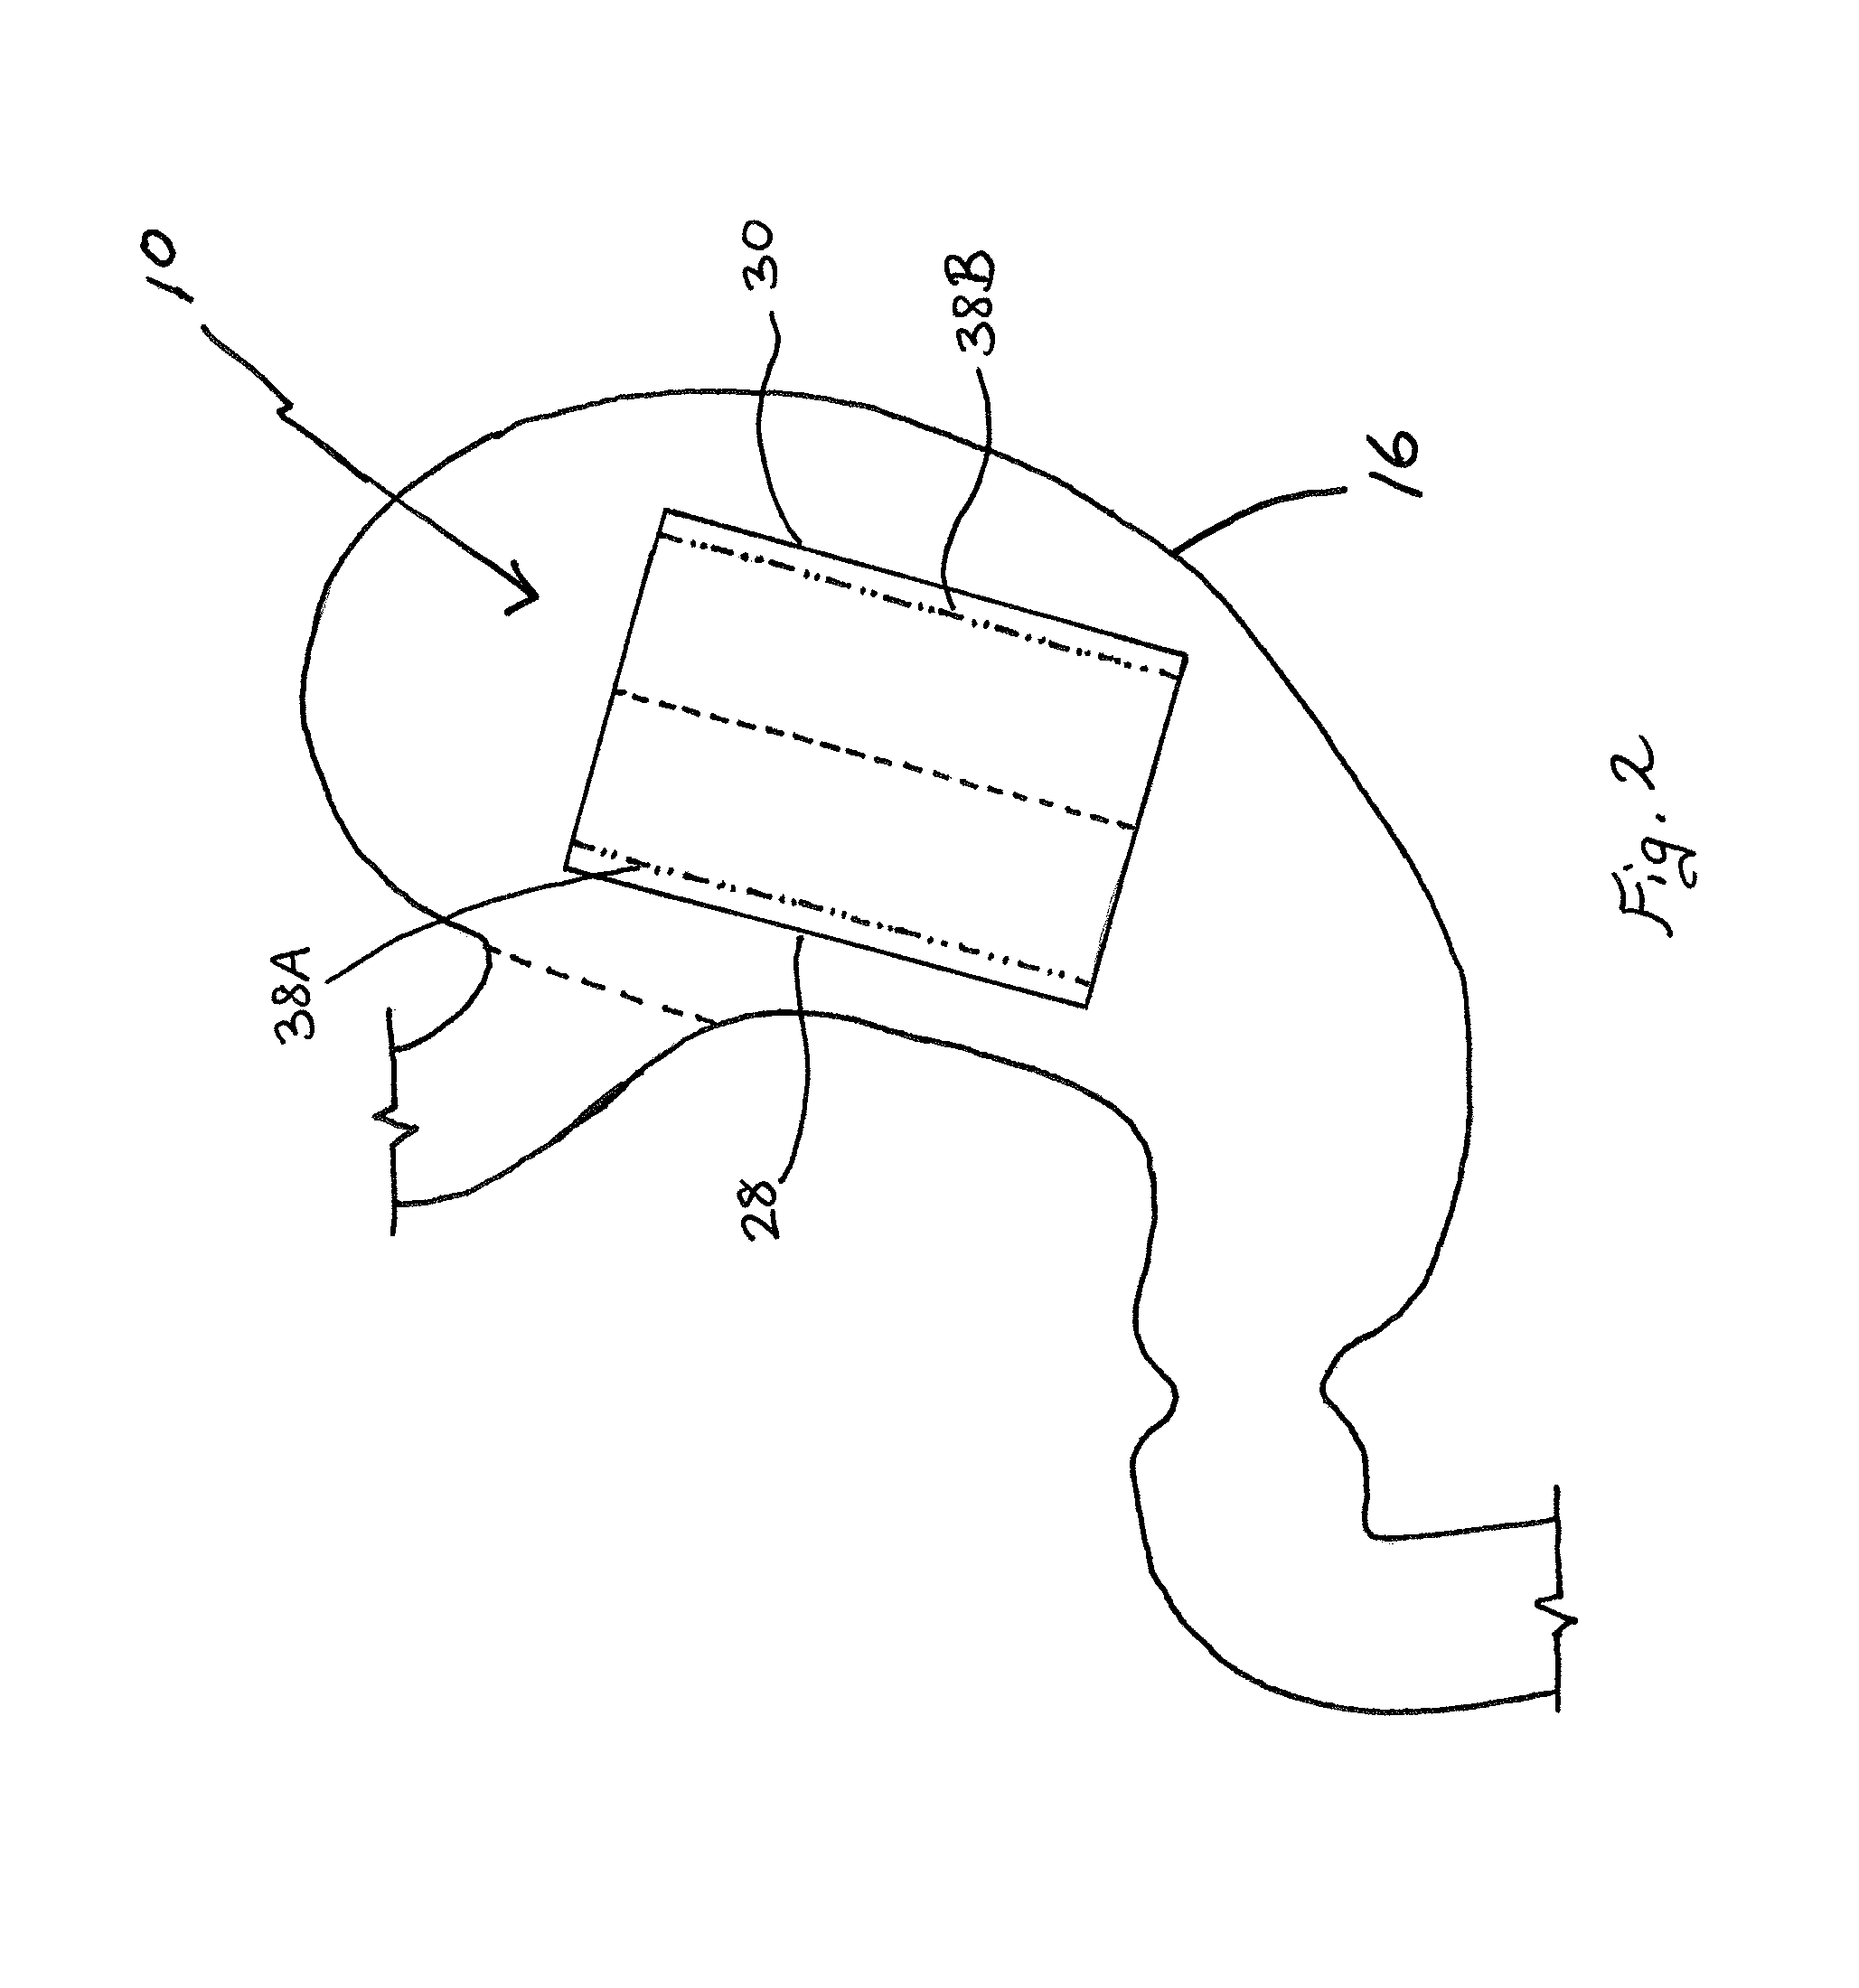 Tissue apposition method and device involving sheets with integrated tensioning system